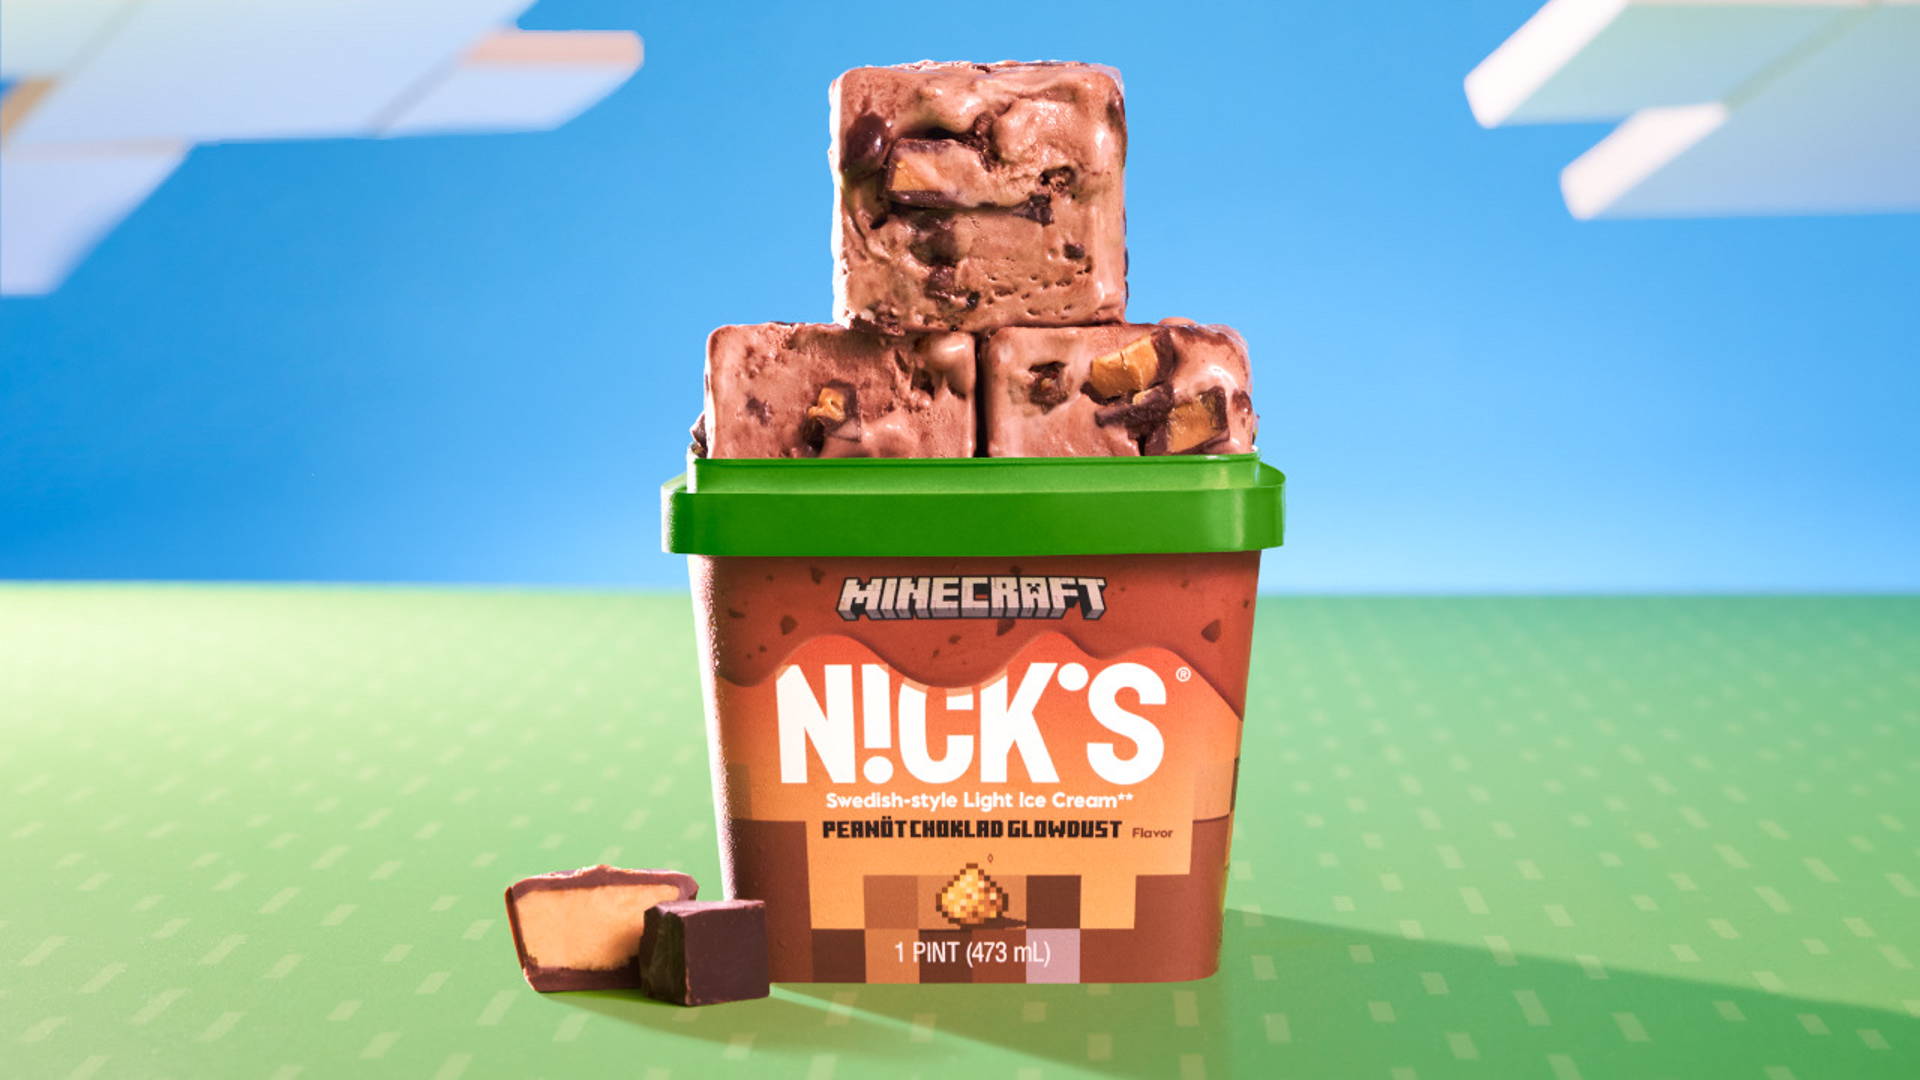 Featured image for Minecraft and N!ck's Ice Cream Release Square Pint Collection